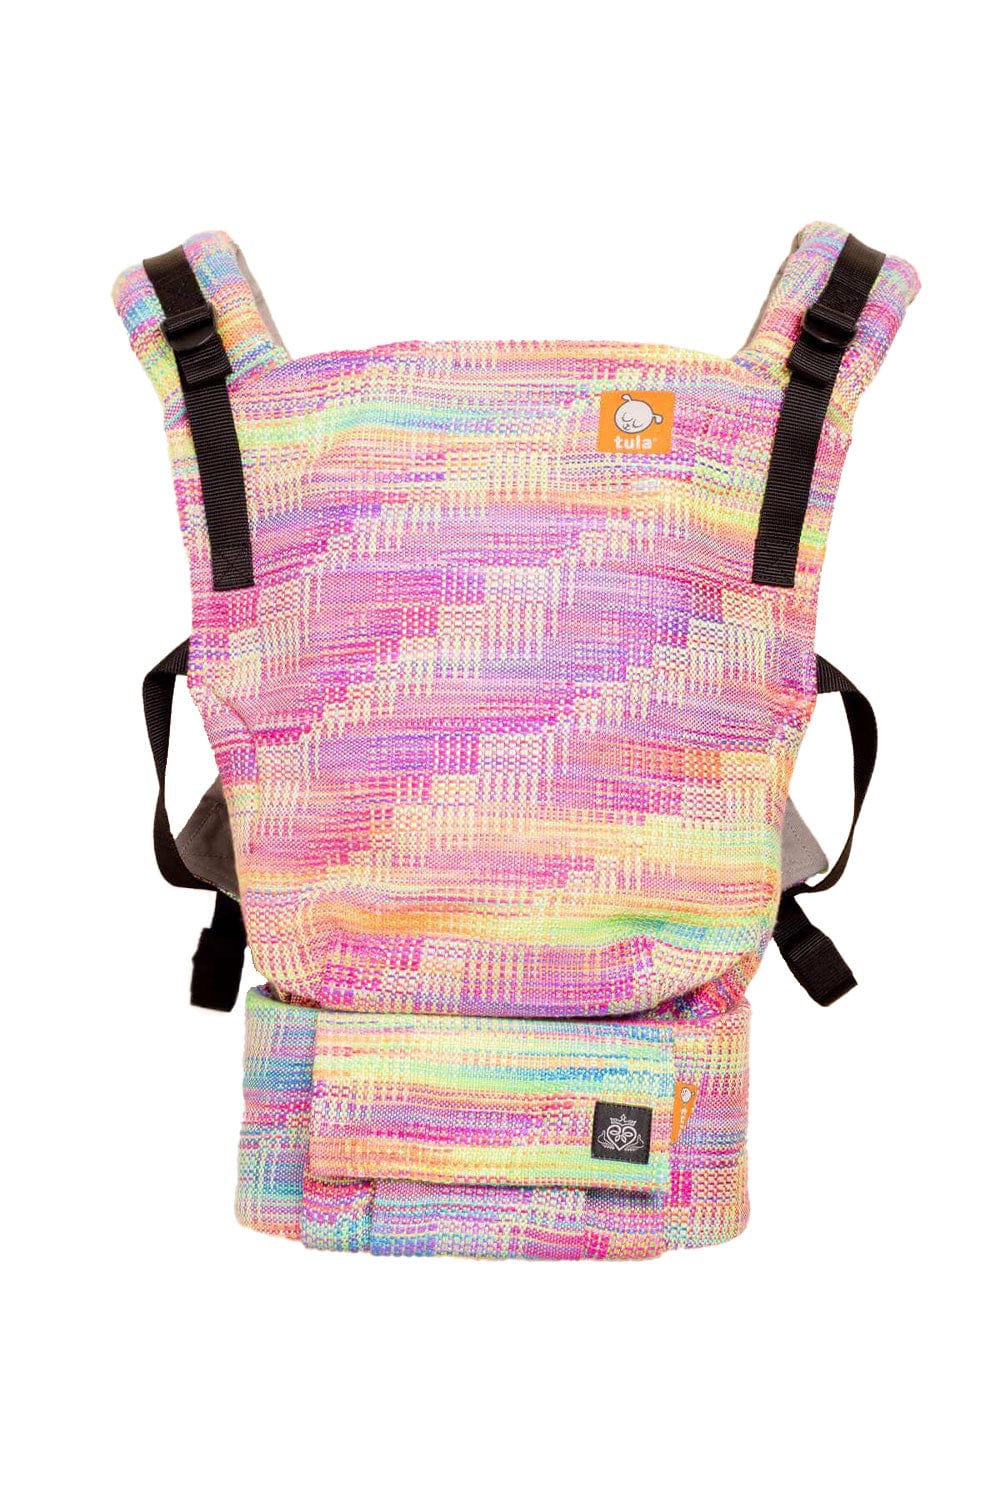 Paradise Found - Signature Handwoven Free-to-Grow Baby Carrier